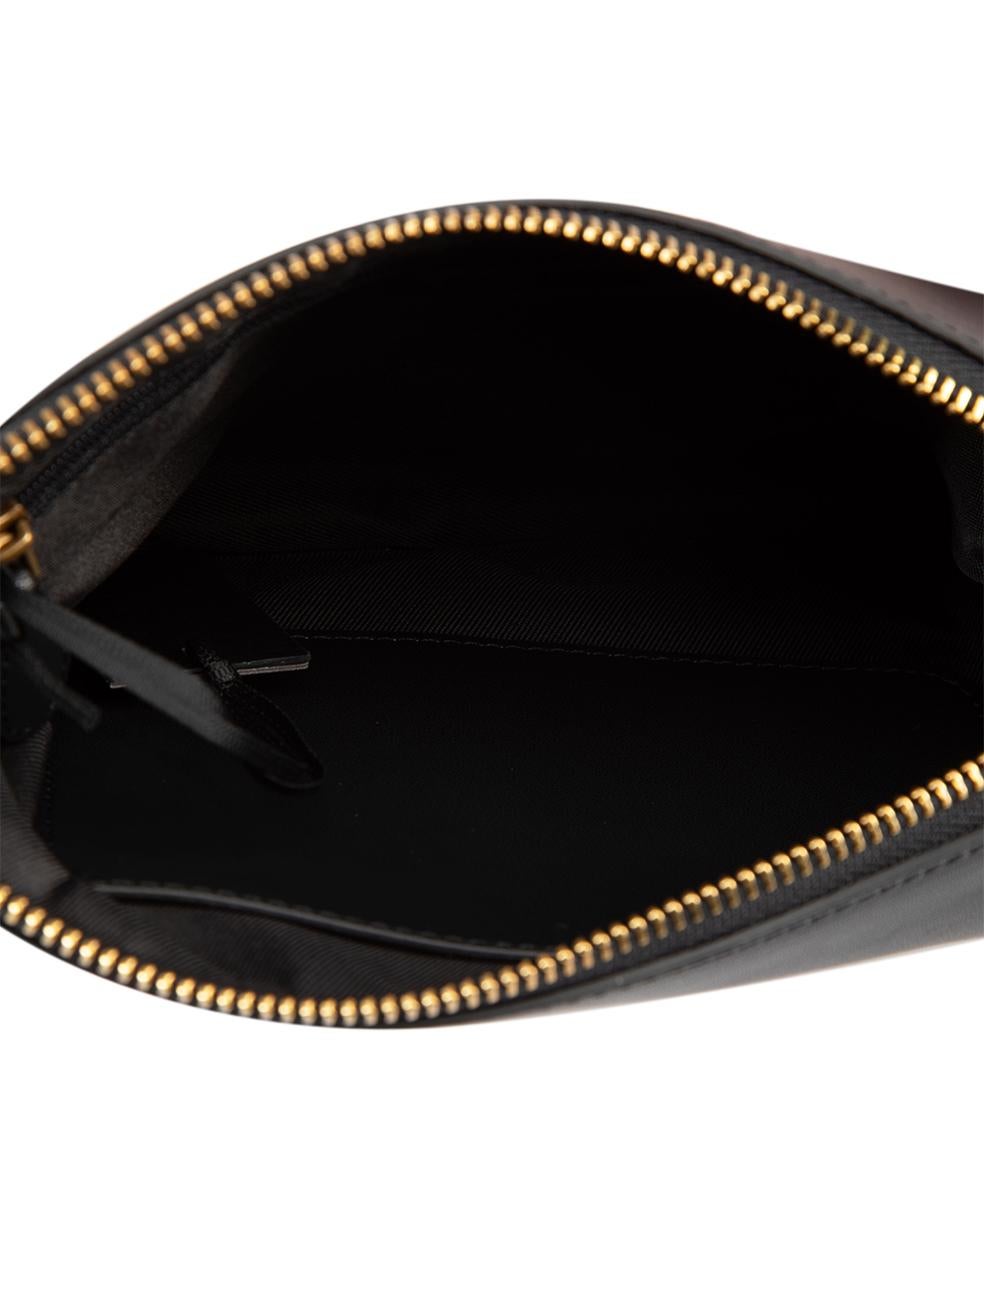 Pinko Black Leather Classic Flat Love Bag Simply For Sale 1